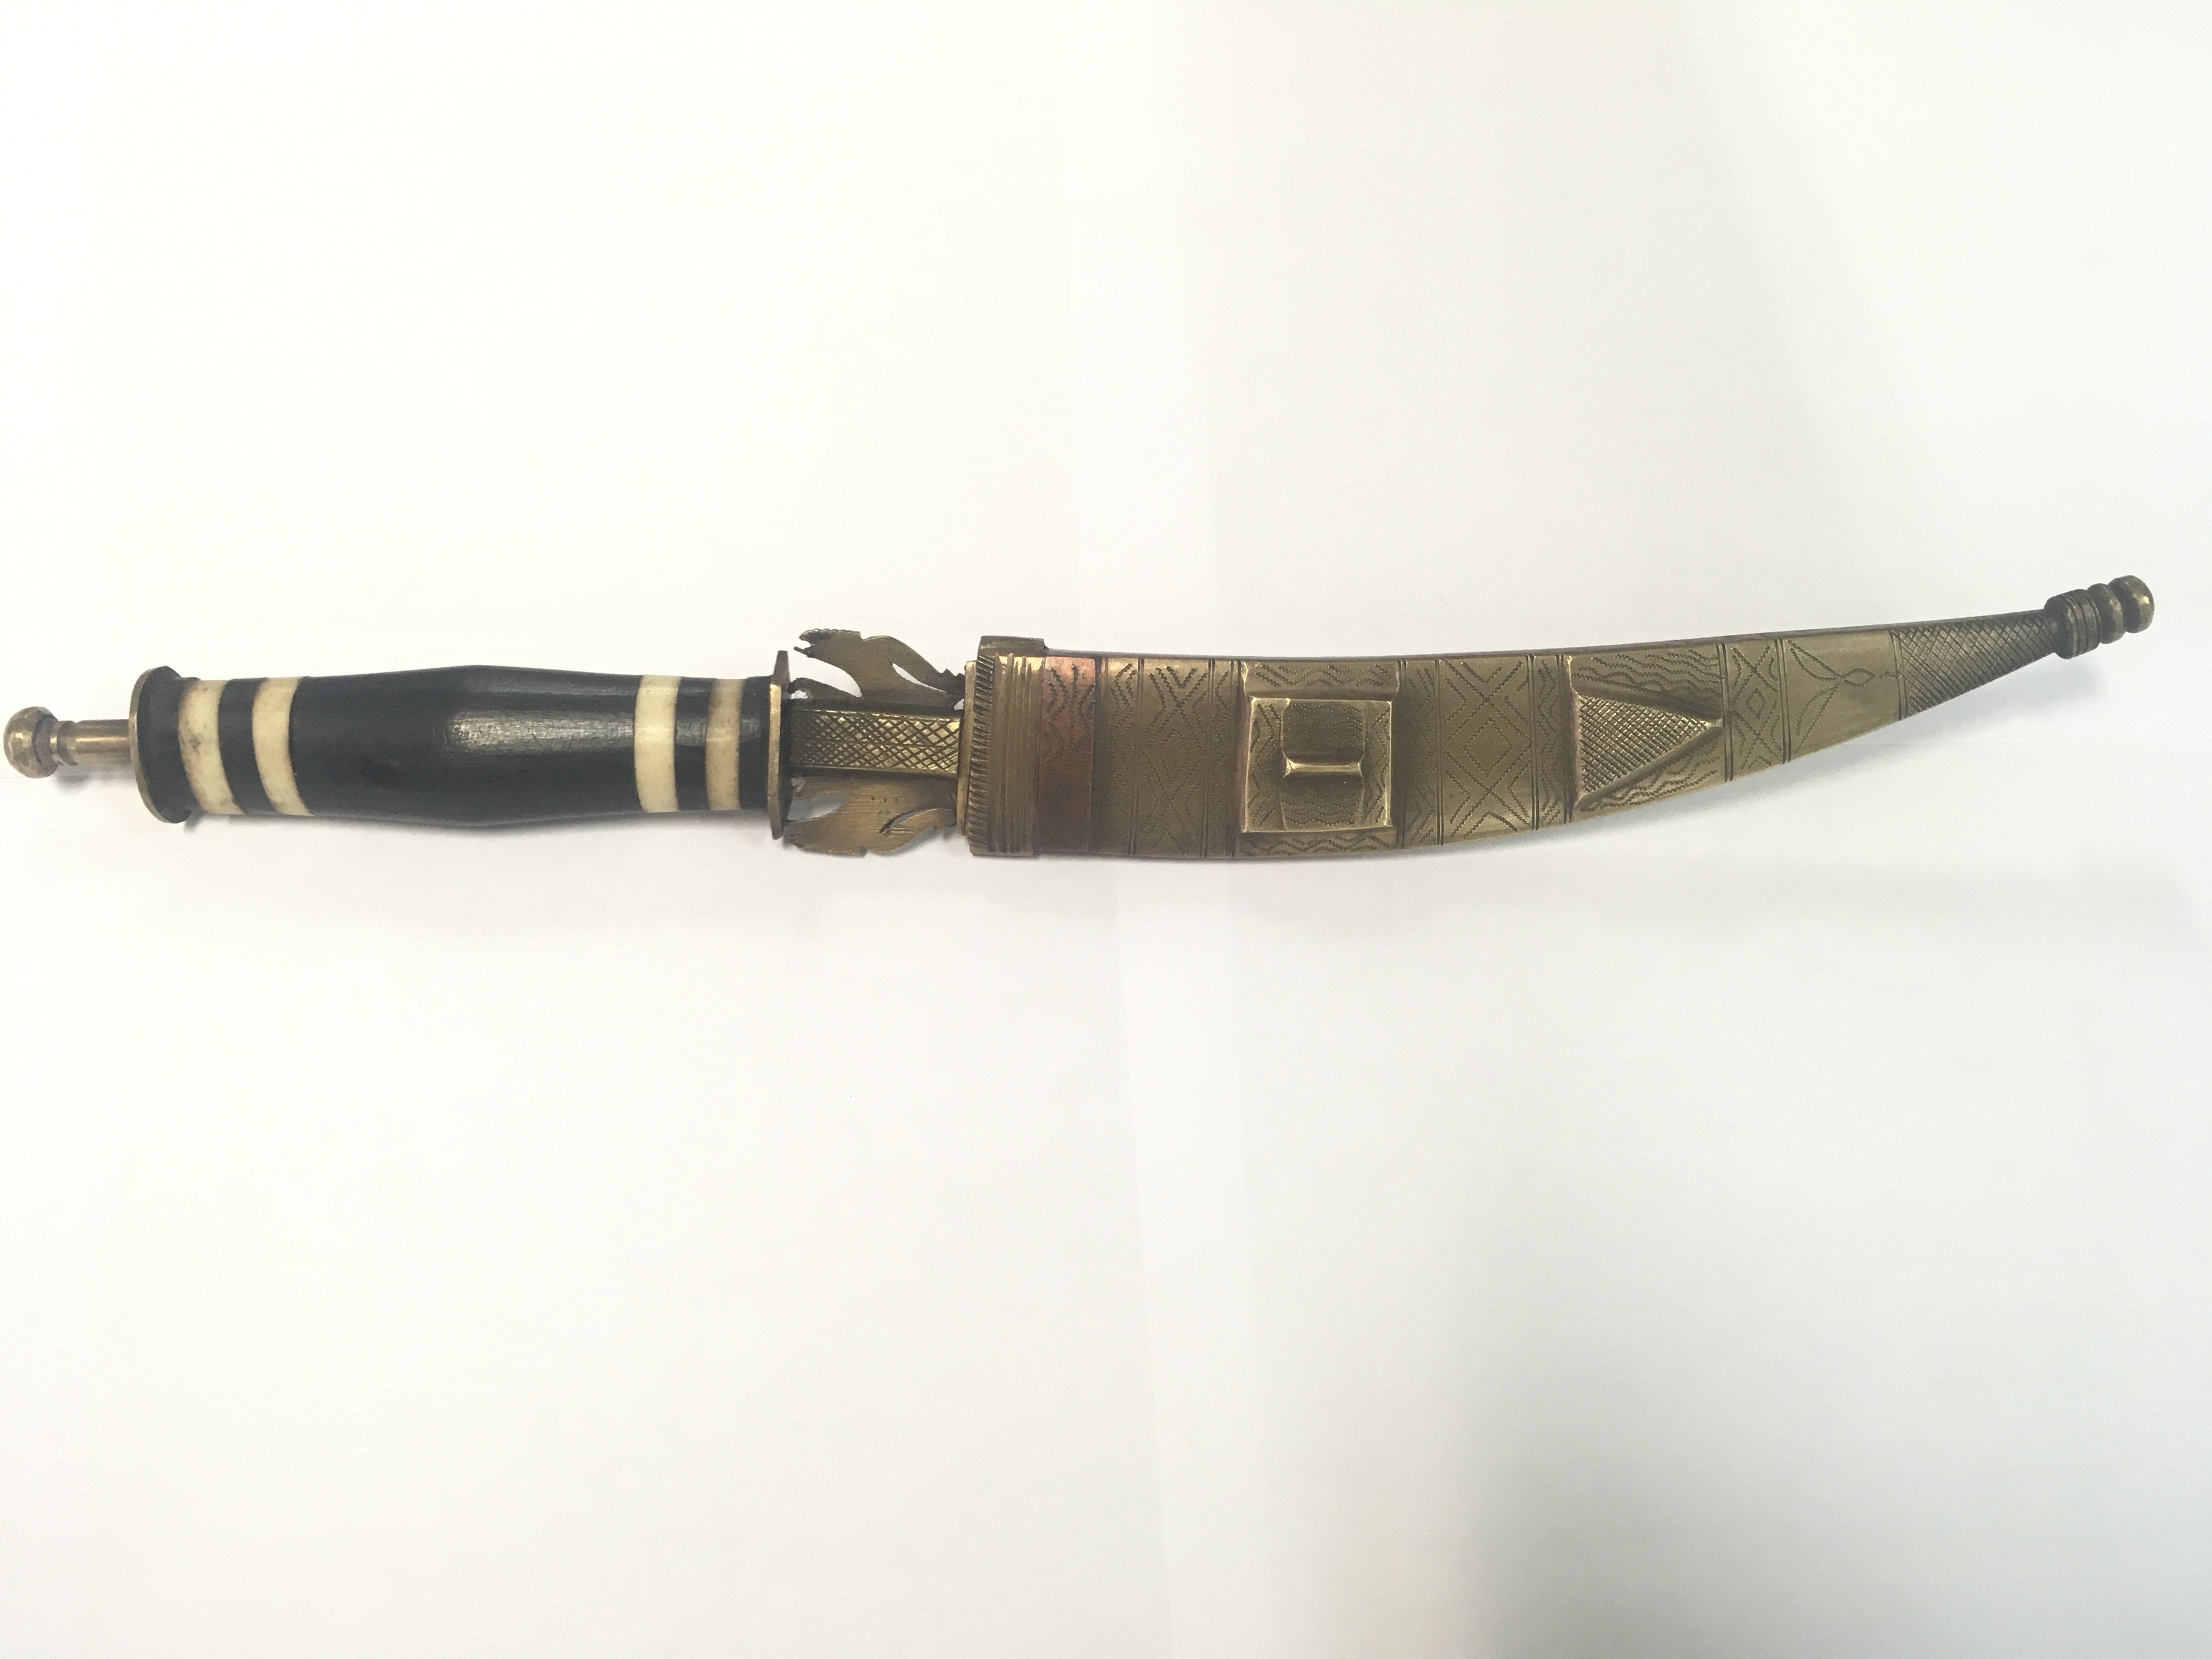 Unusual antique knife in brass scabbard with a woo